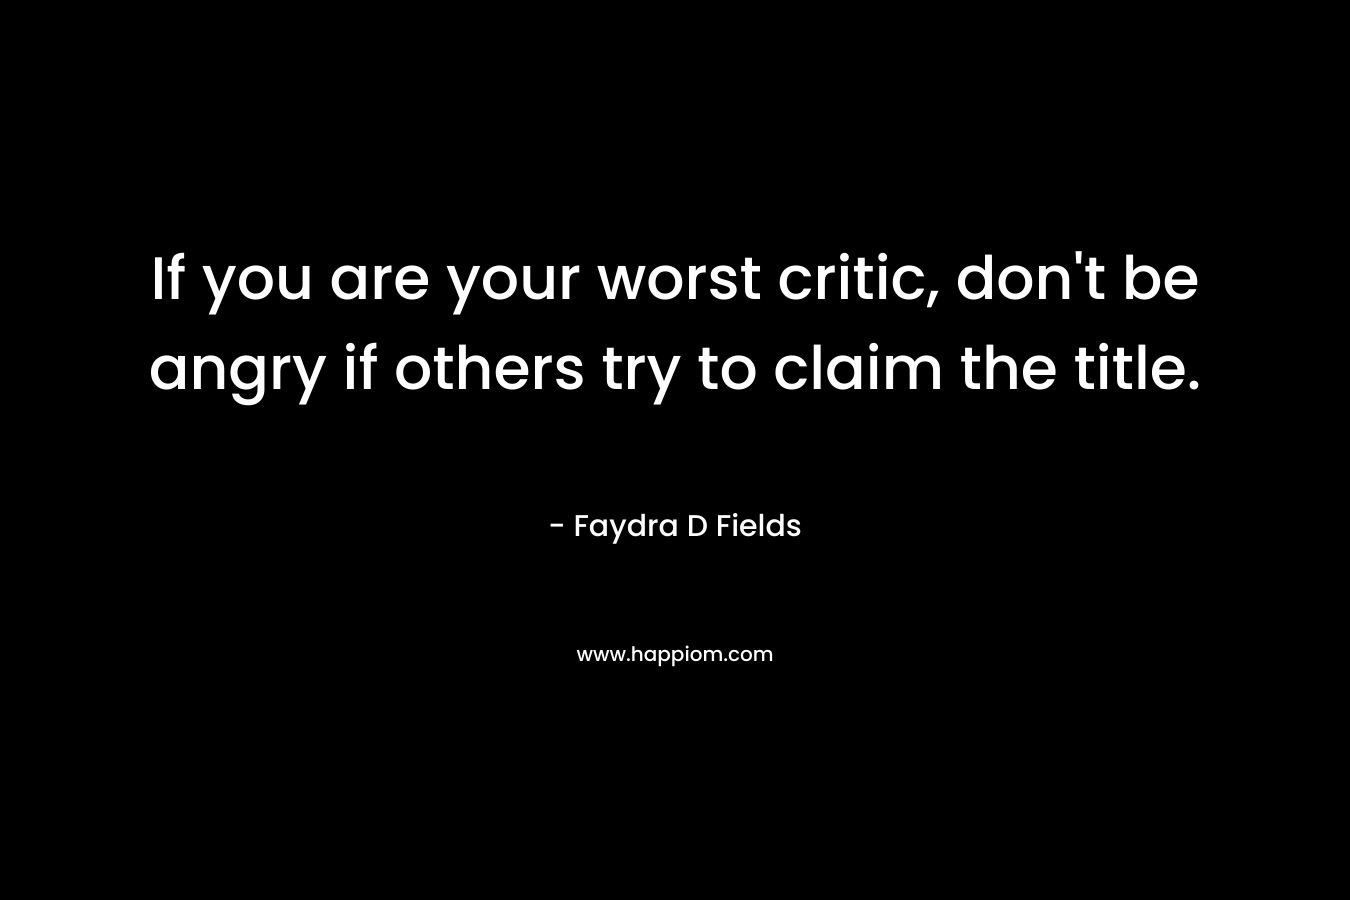 If you are your worst critic, don’t be angry if others try to claim the title. – Faydra D Fields